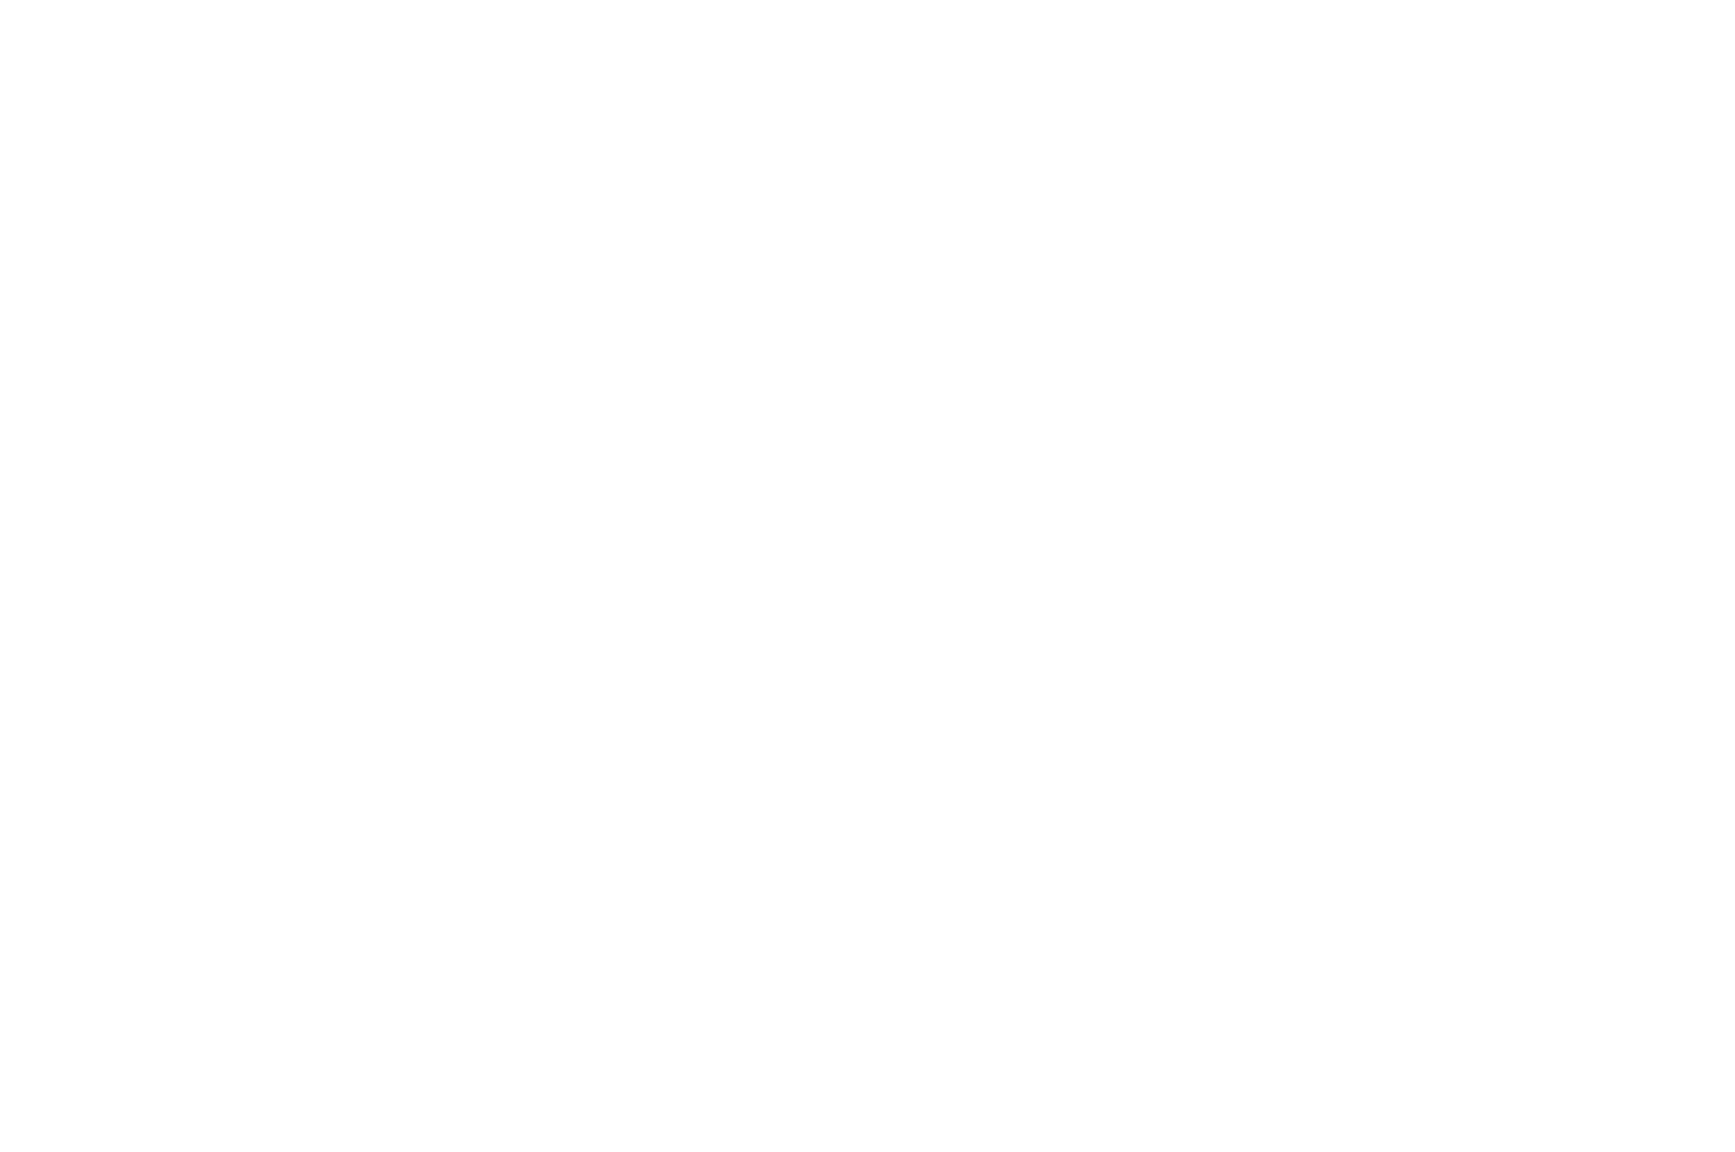 OFFICIAL SELECTION - Horsetooth International Film Festival - 2022.png